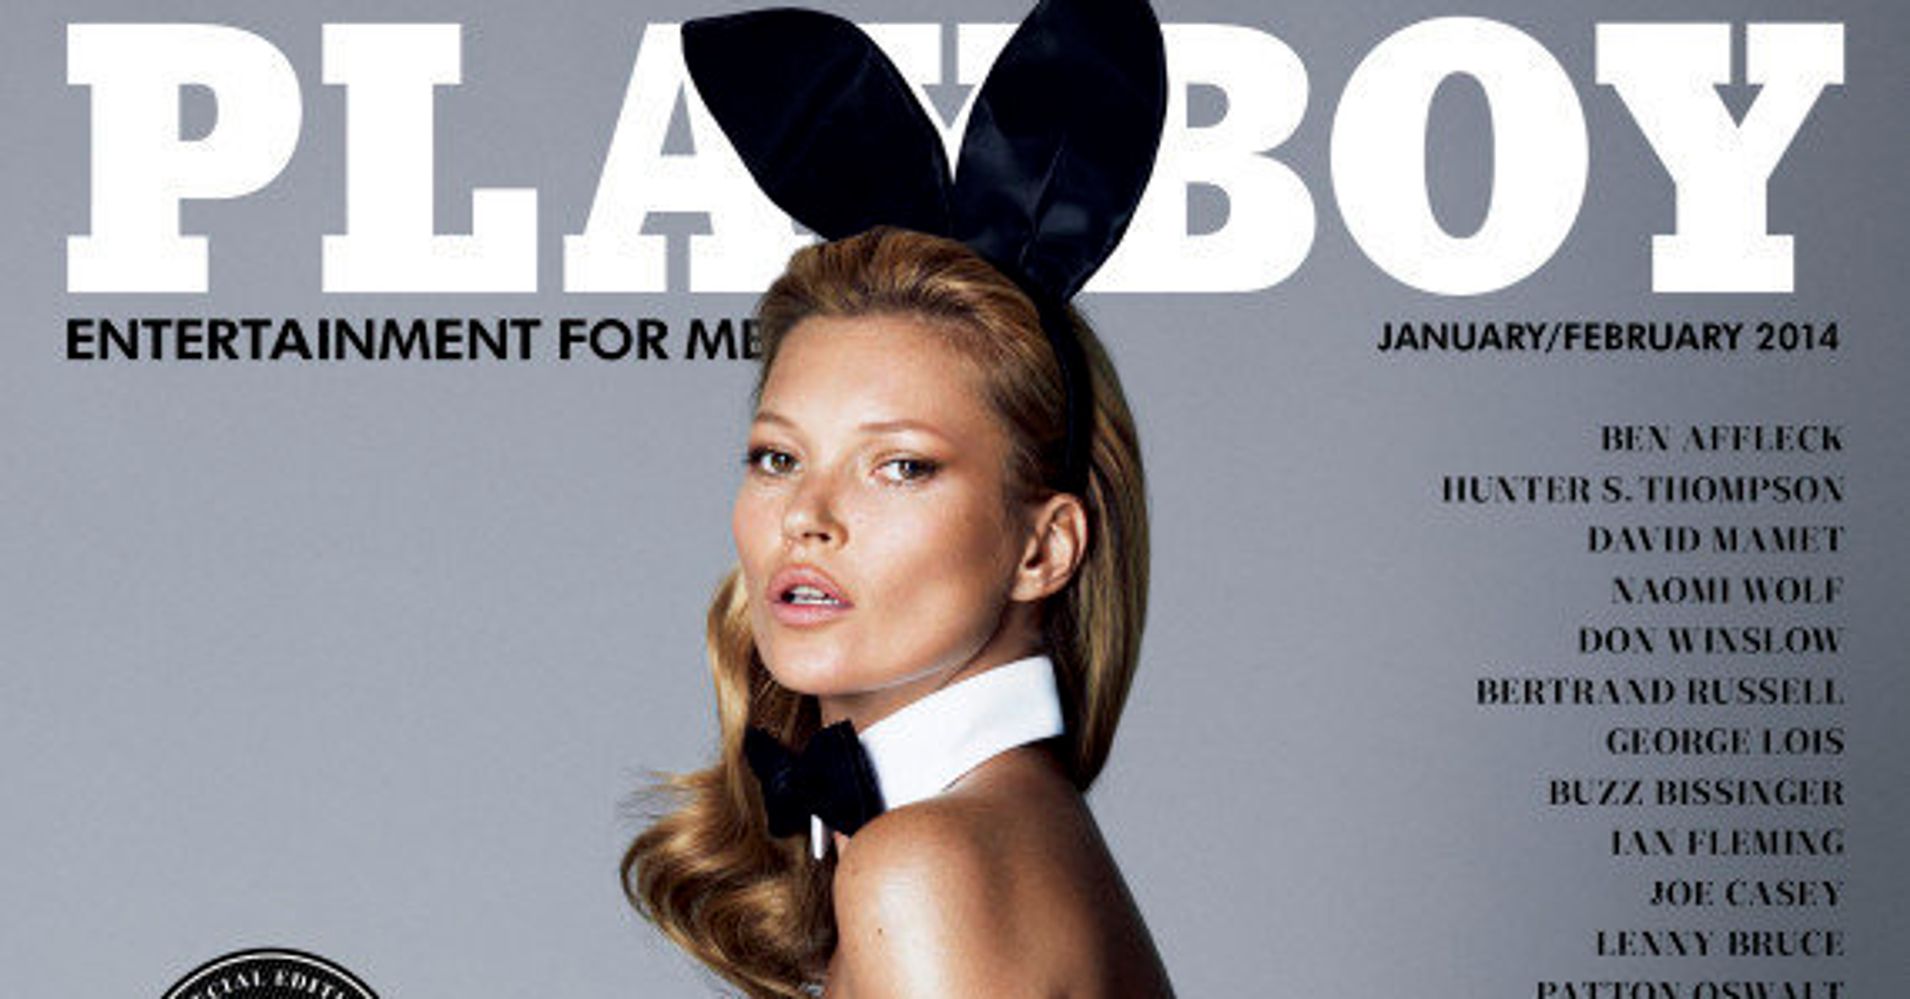 Scientology convinced Playboy magazine to stop publishing 